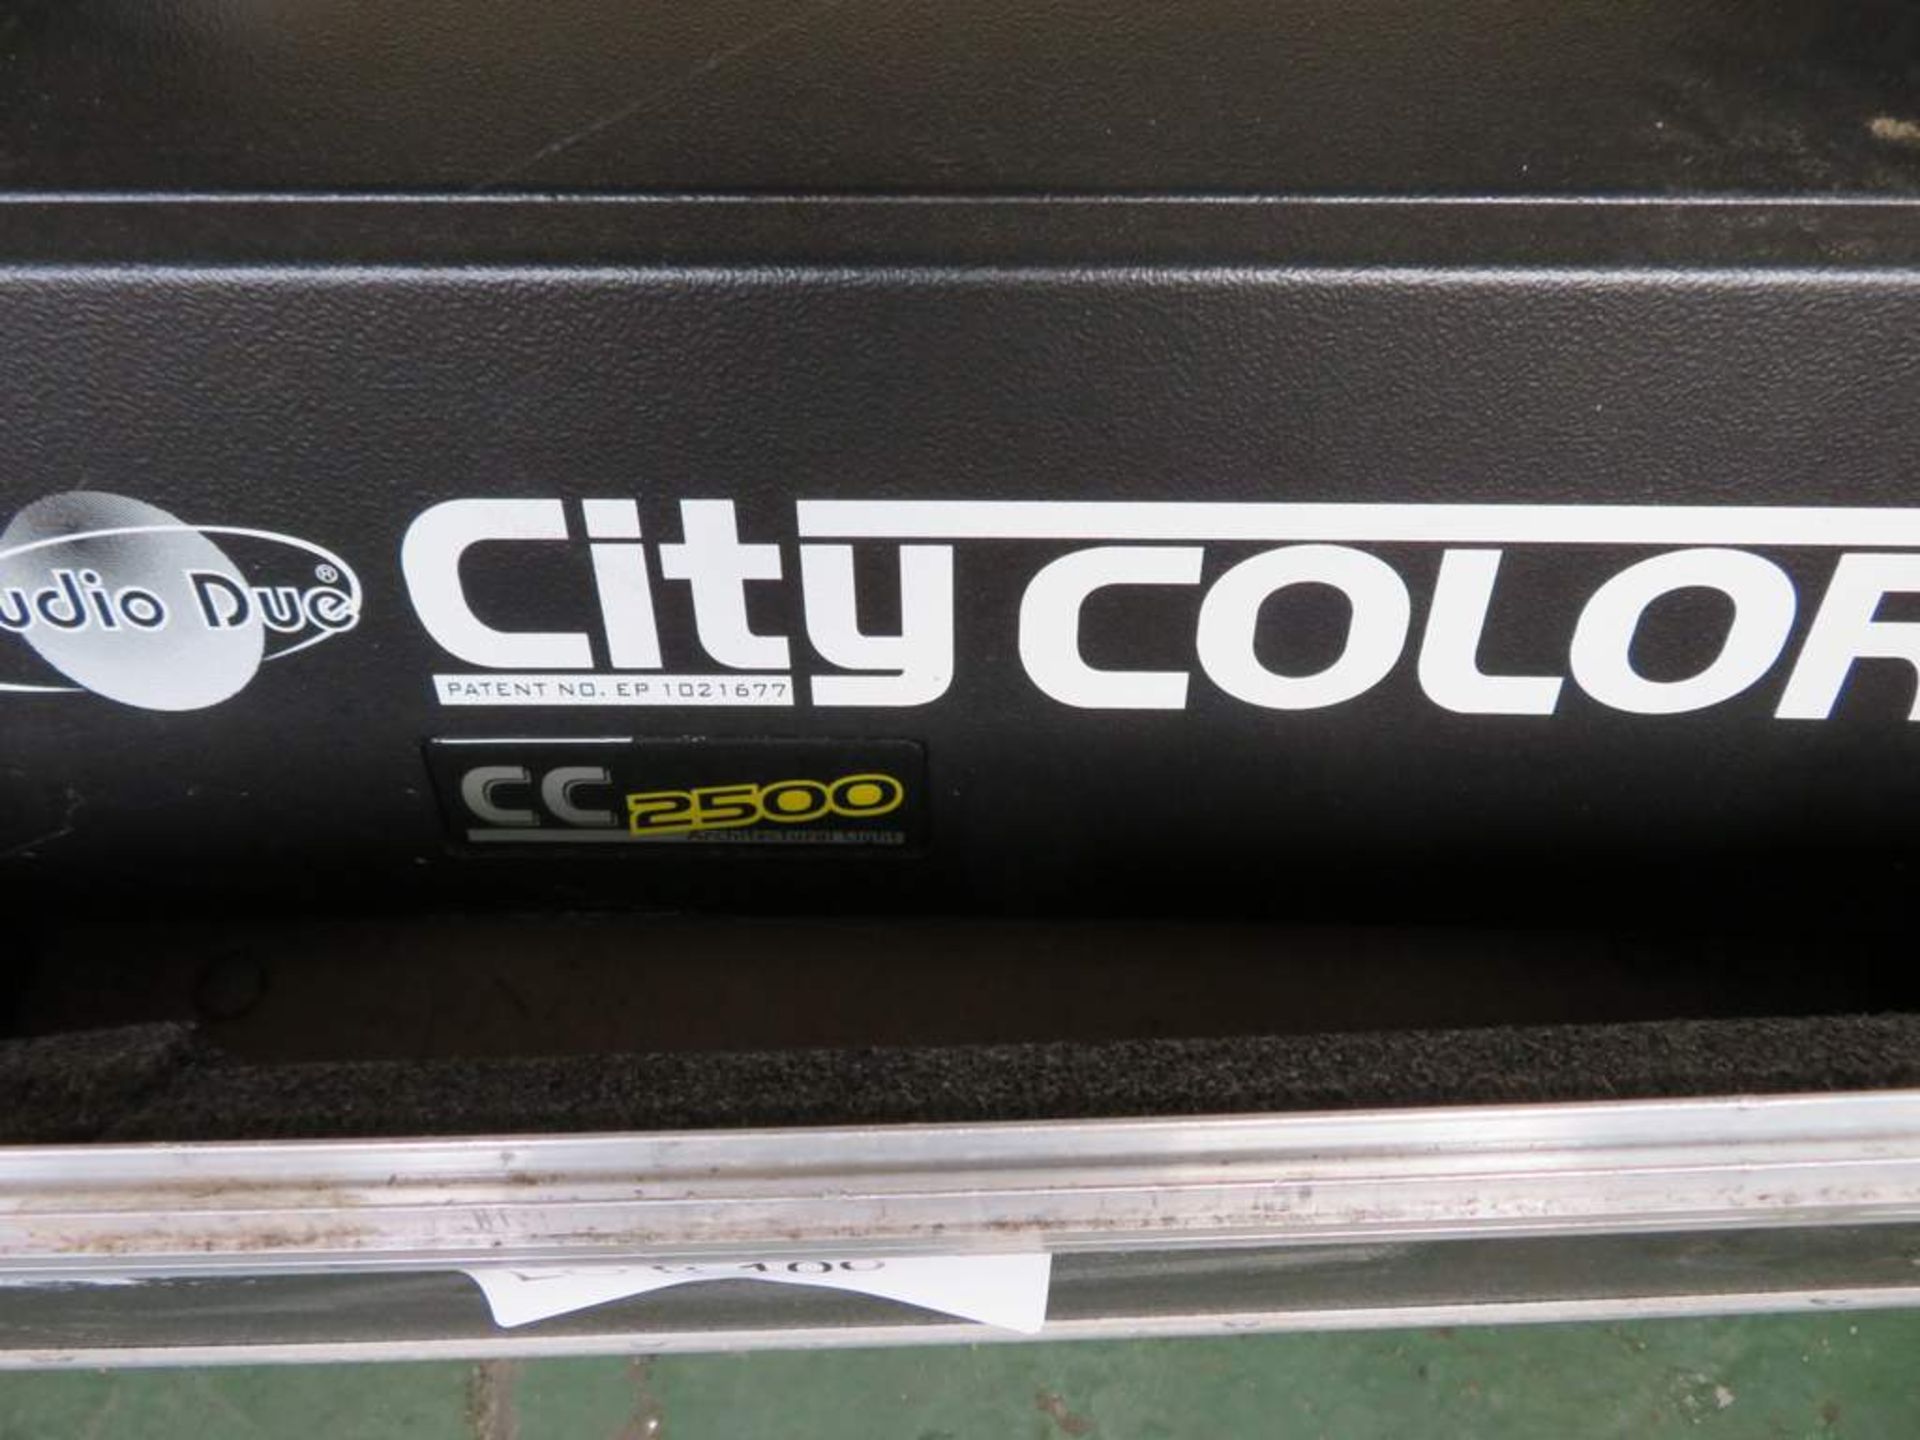 City Colour 2500cc complete with flightcase - Image 4 of 6